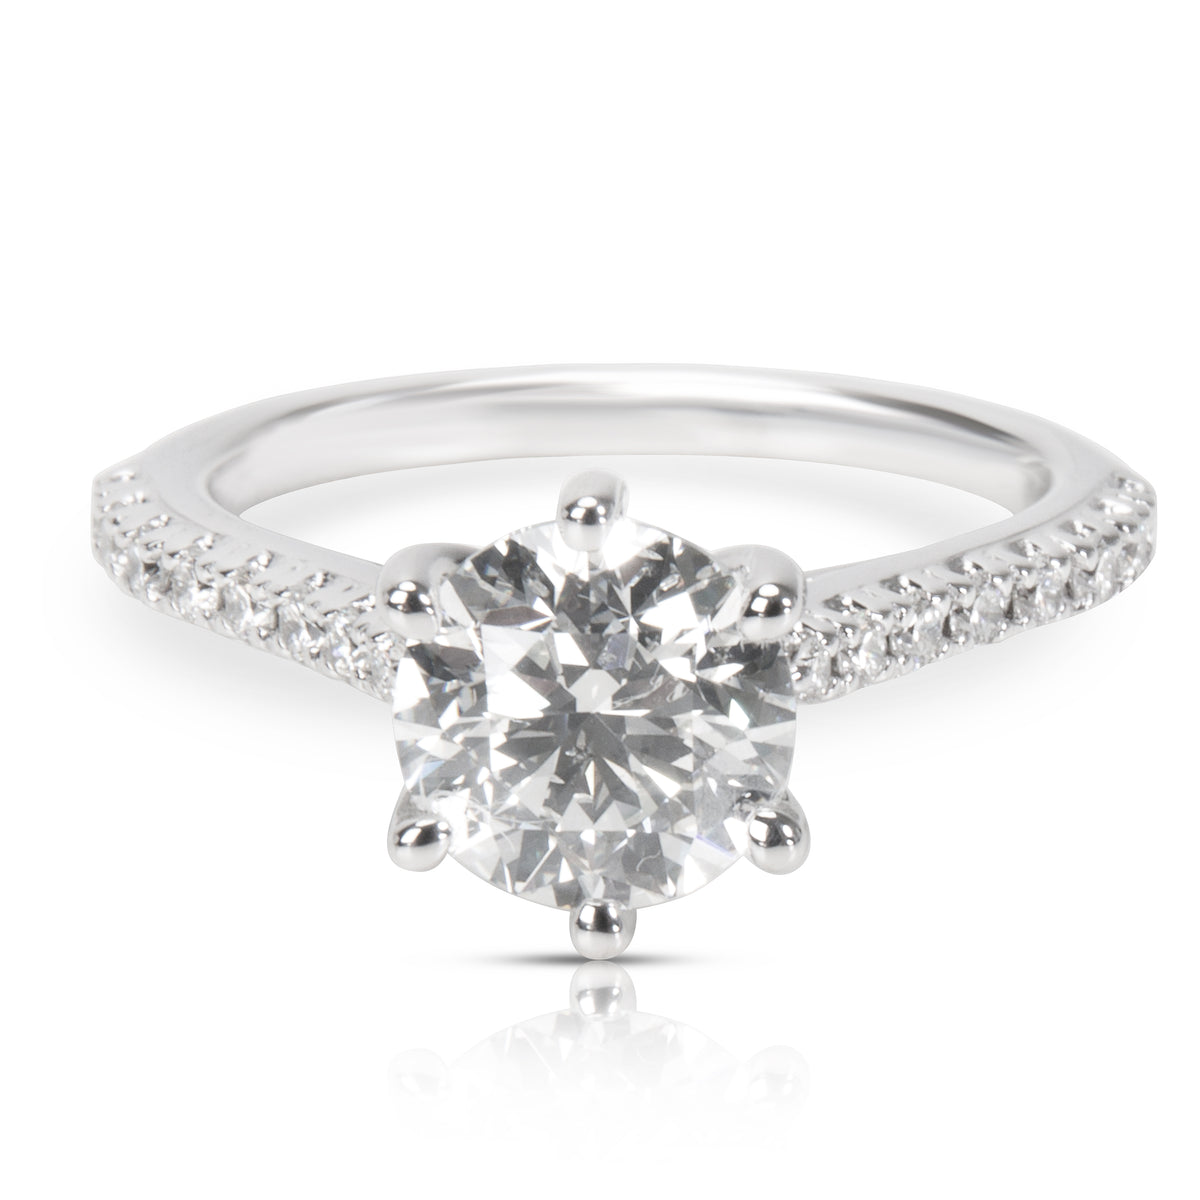 AGS Certified Ritani Diamond Engagement Ring (1.60 ct H/SI2)